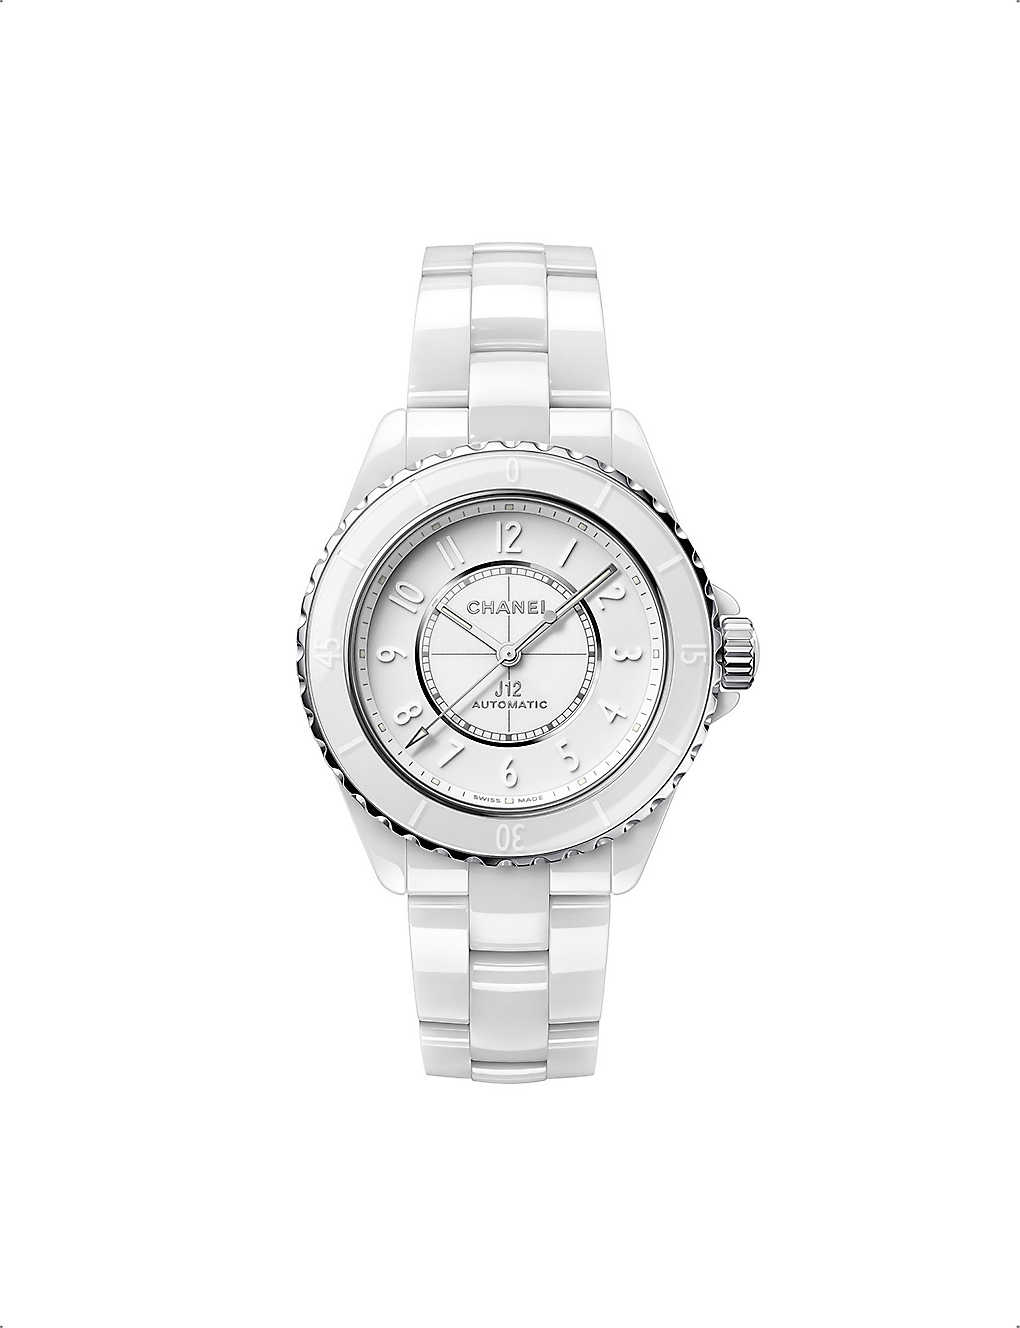 CHANEL - H6186 J12 Phantom ceramic and stainless steel automatic watch